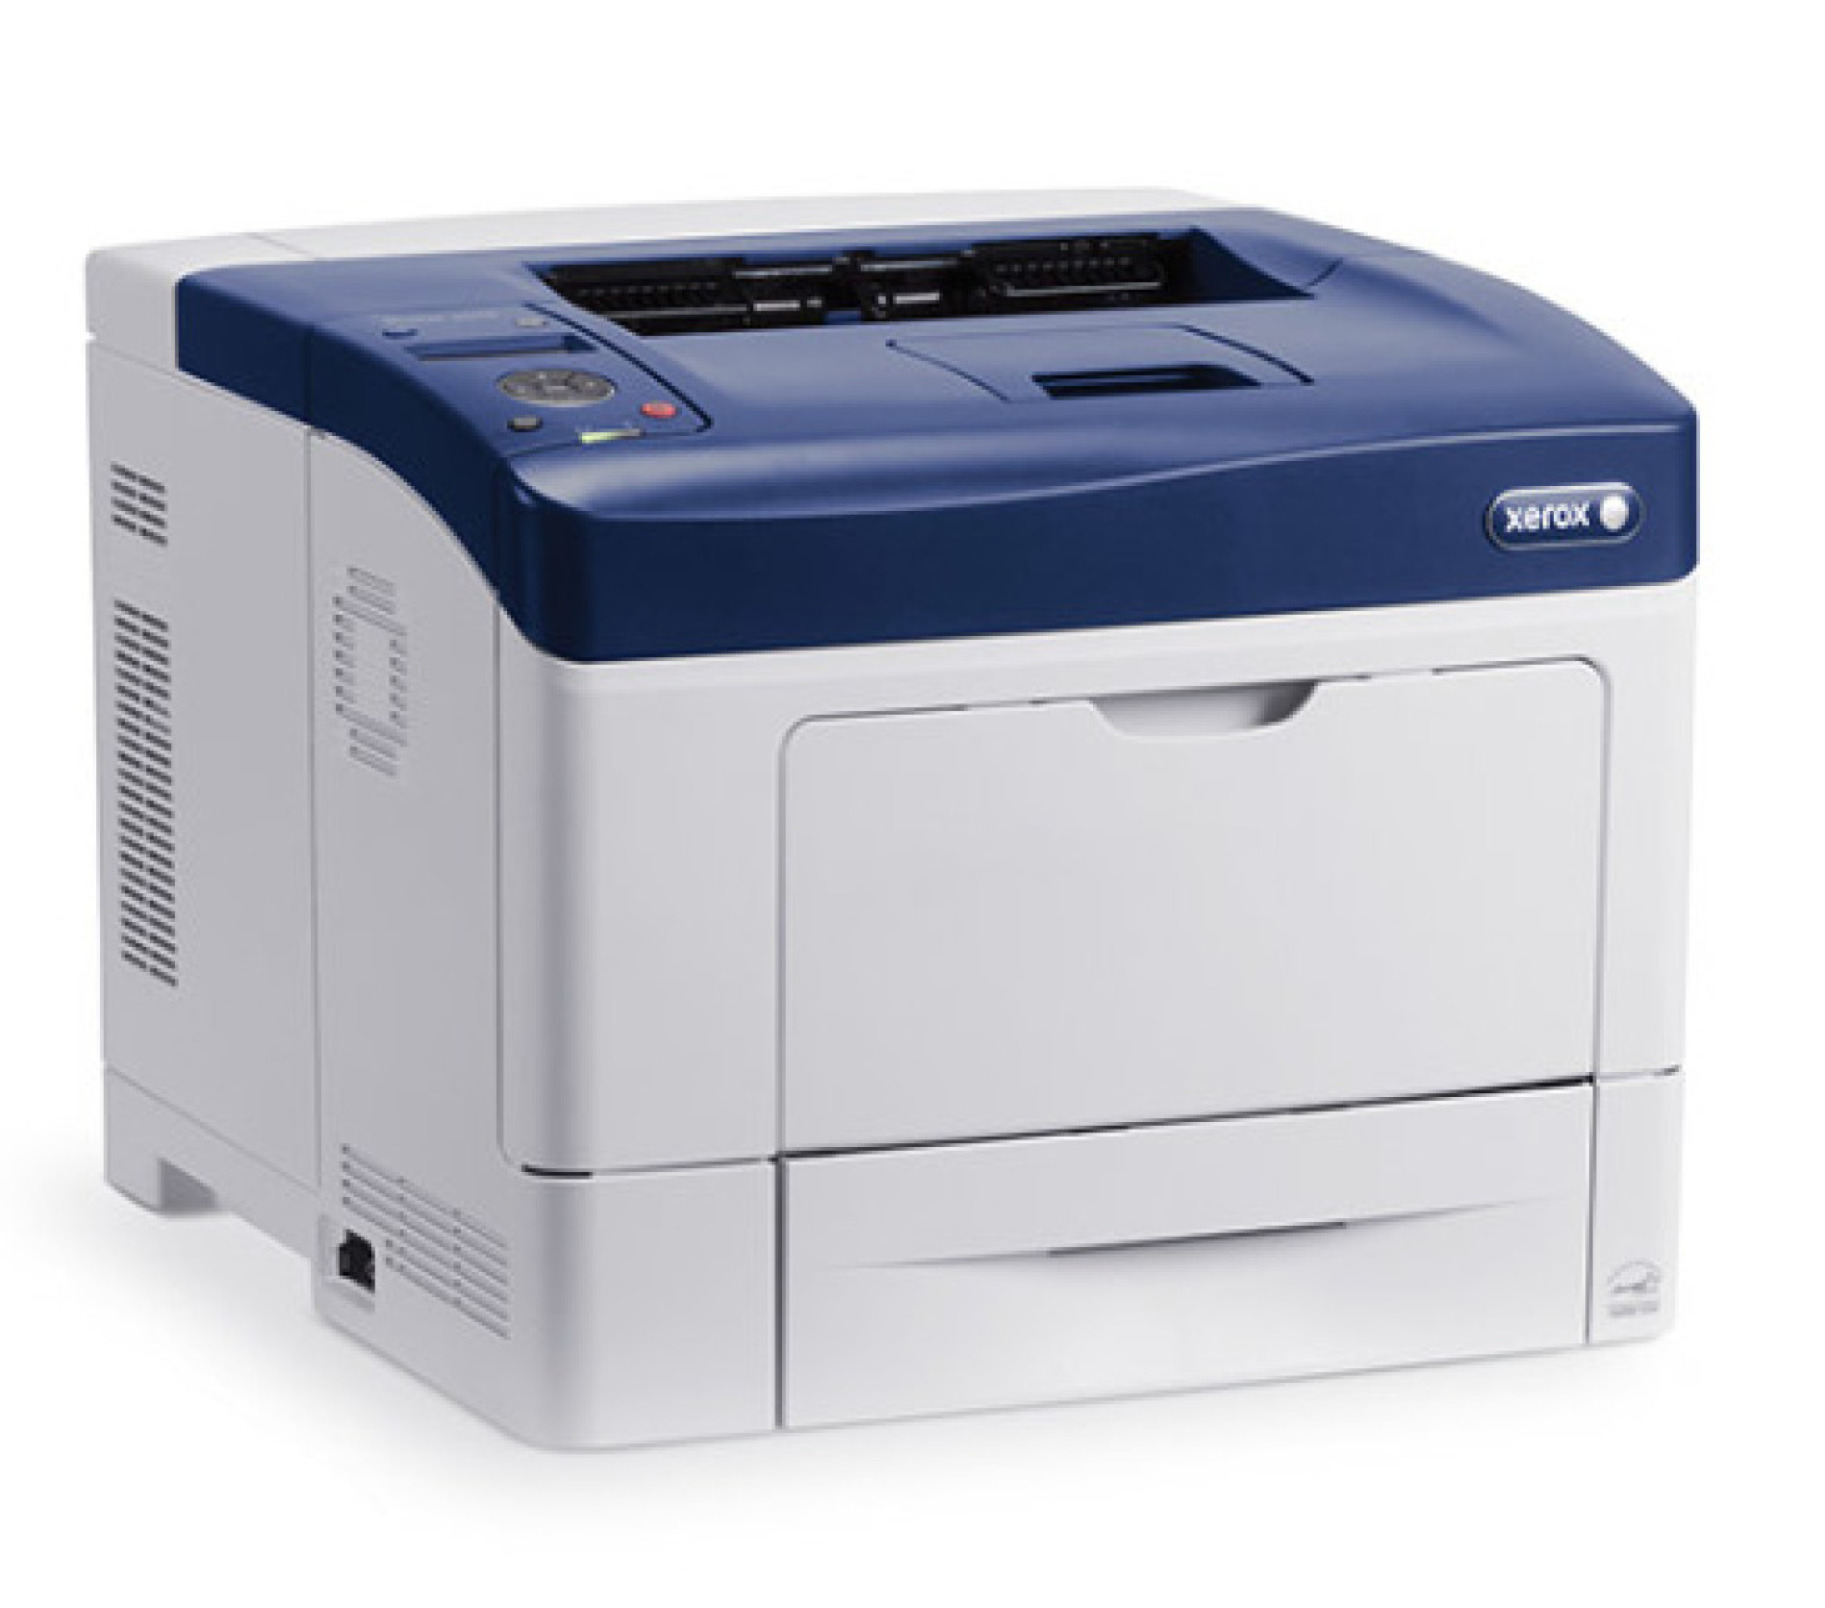 Xerox 3610 Above 75% Used A Ethernet Usb &lt;50K Pages A4 A5 B/W Laser-Printer UNL